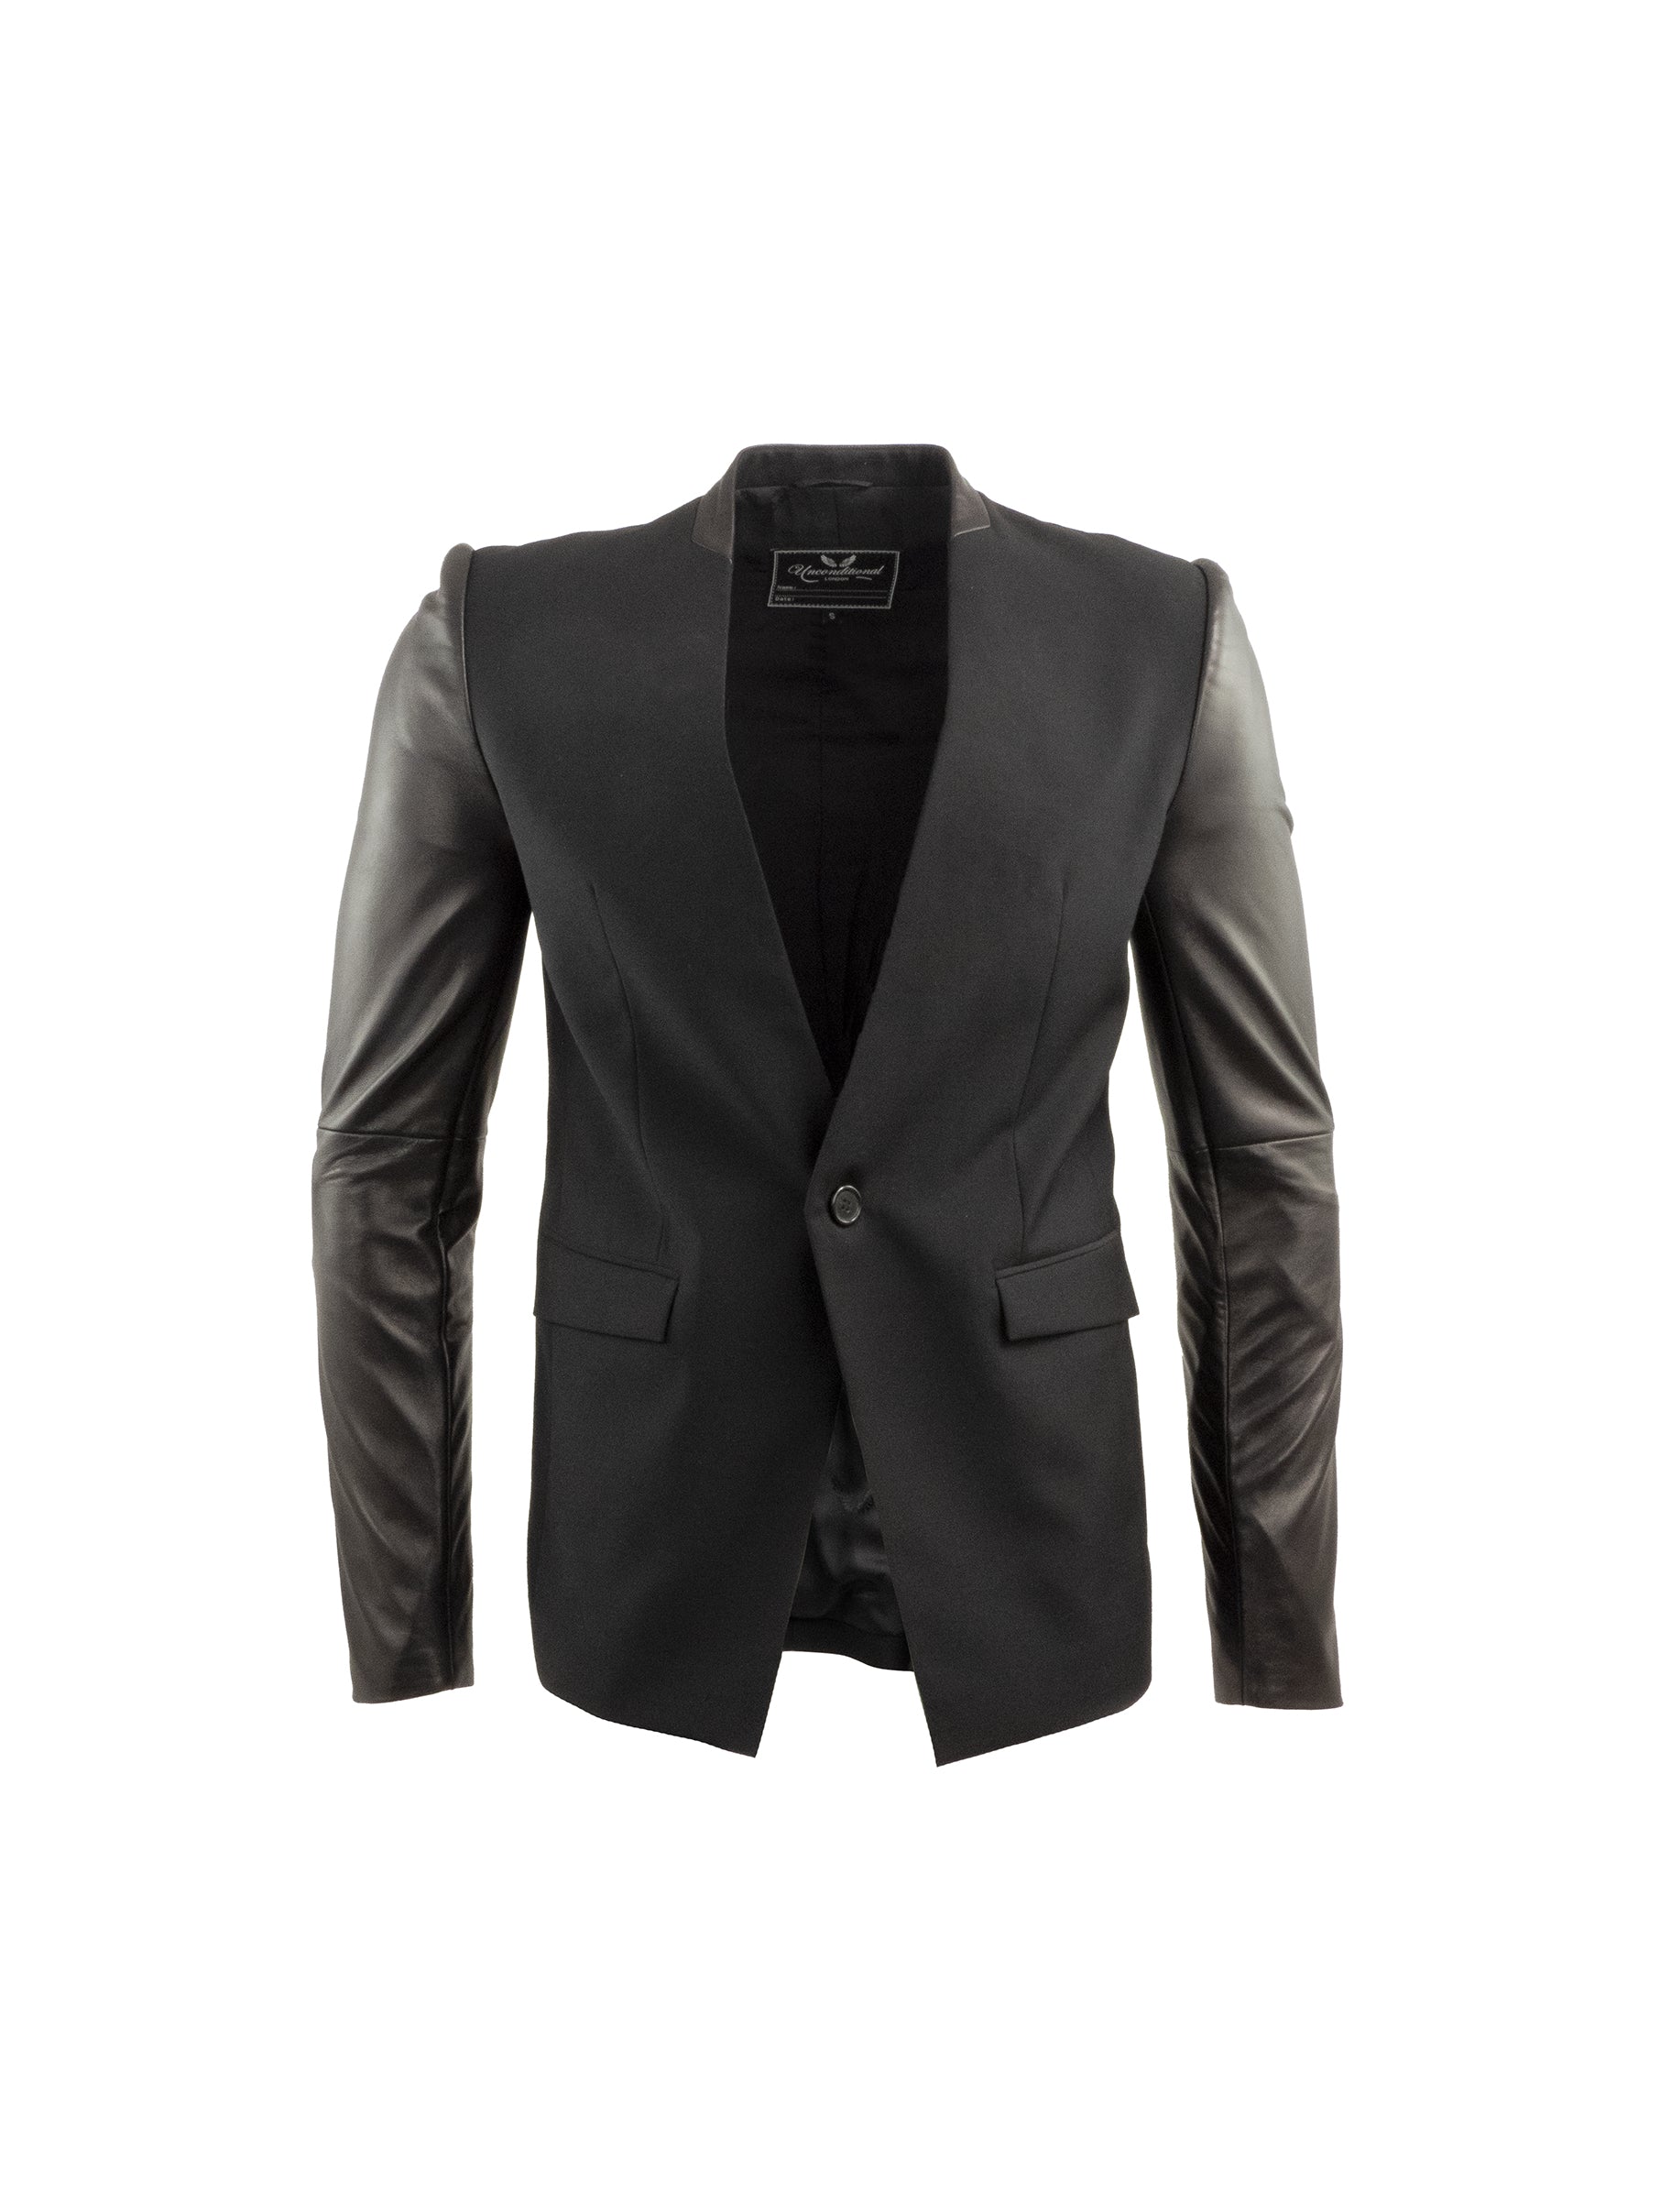 BLACK JACKET WITH LEATHER COLLAR AND SLEEVES